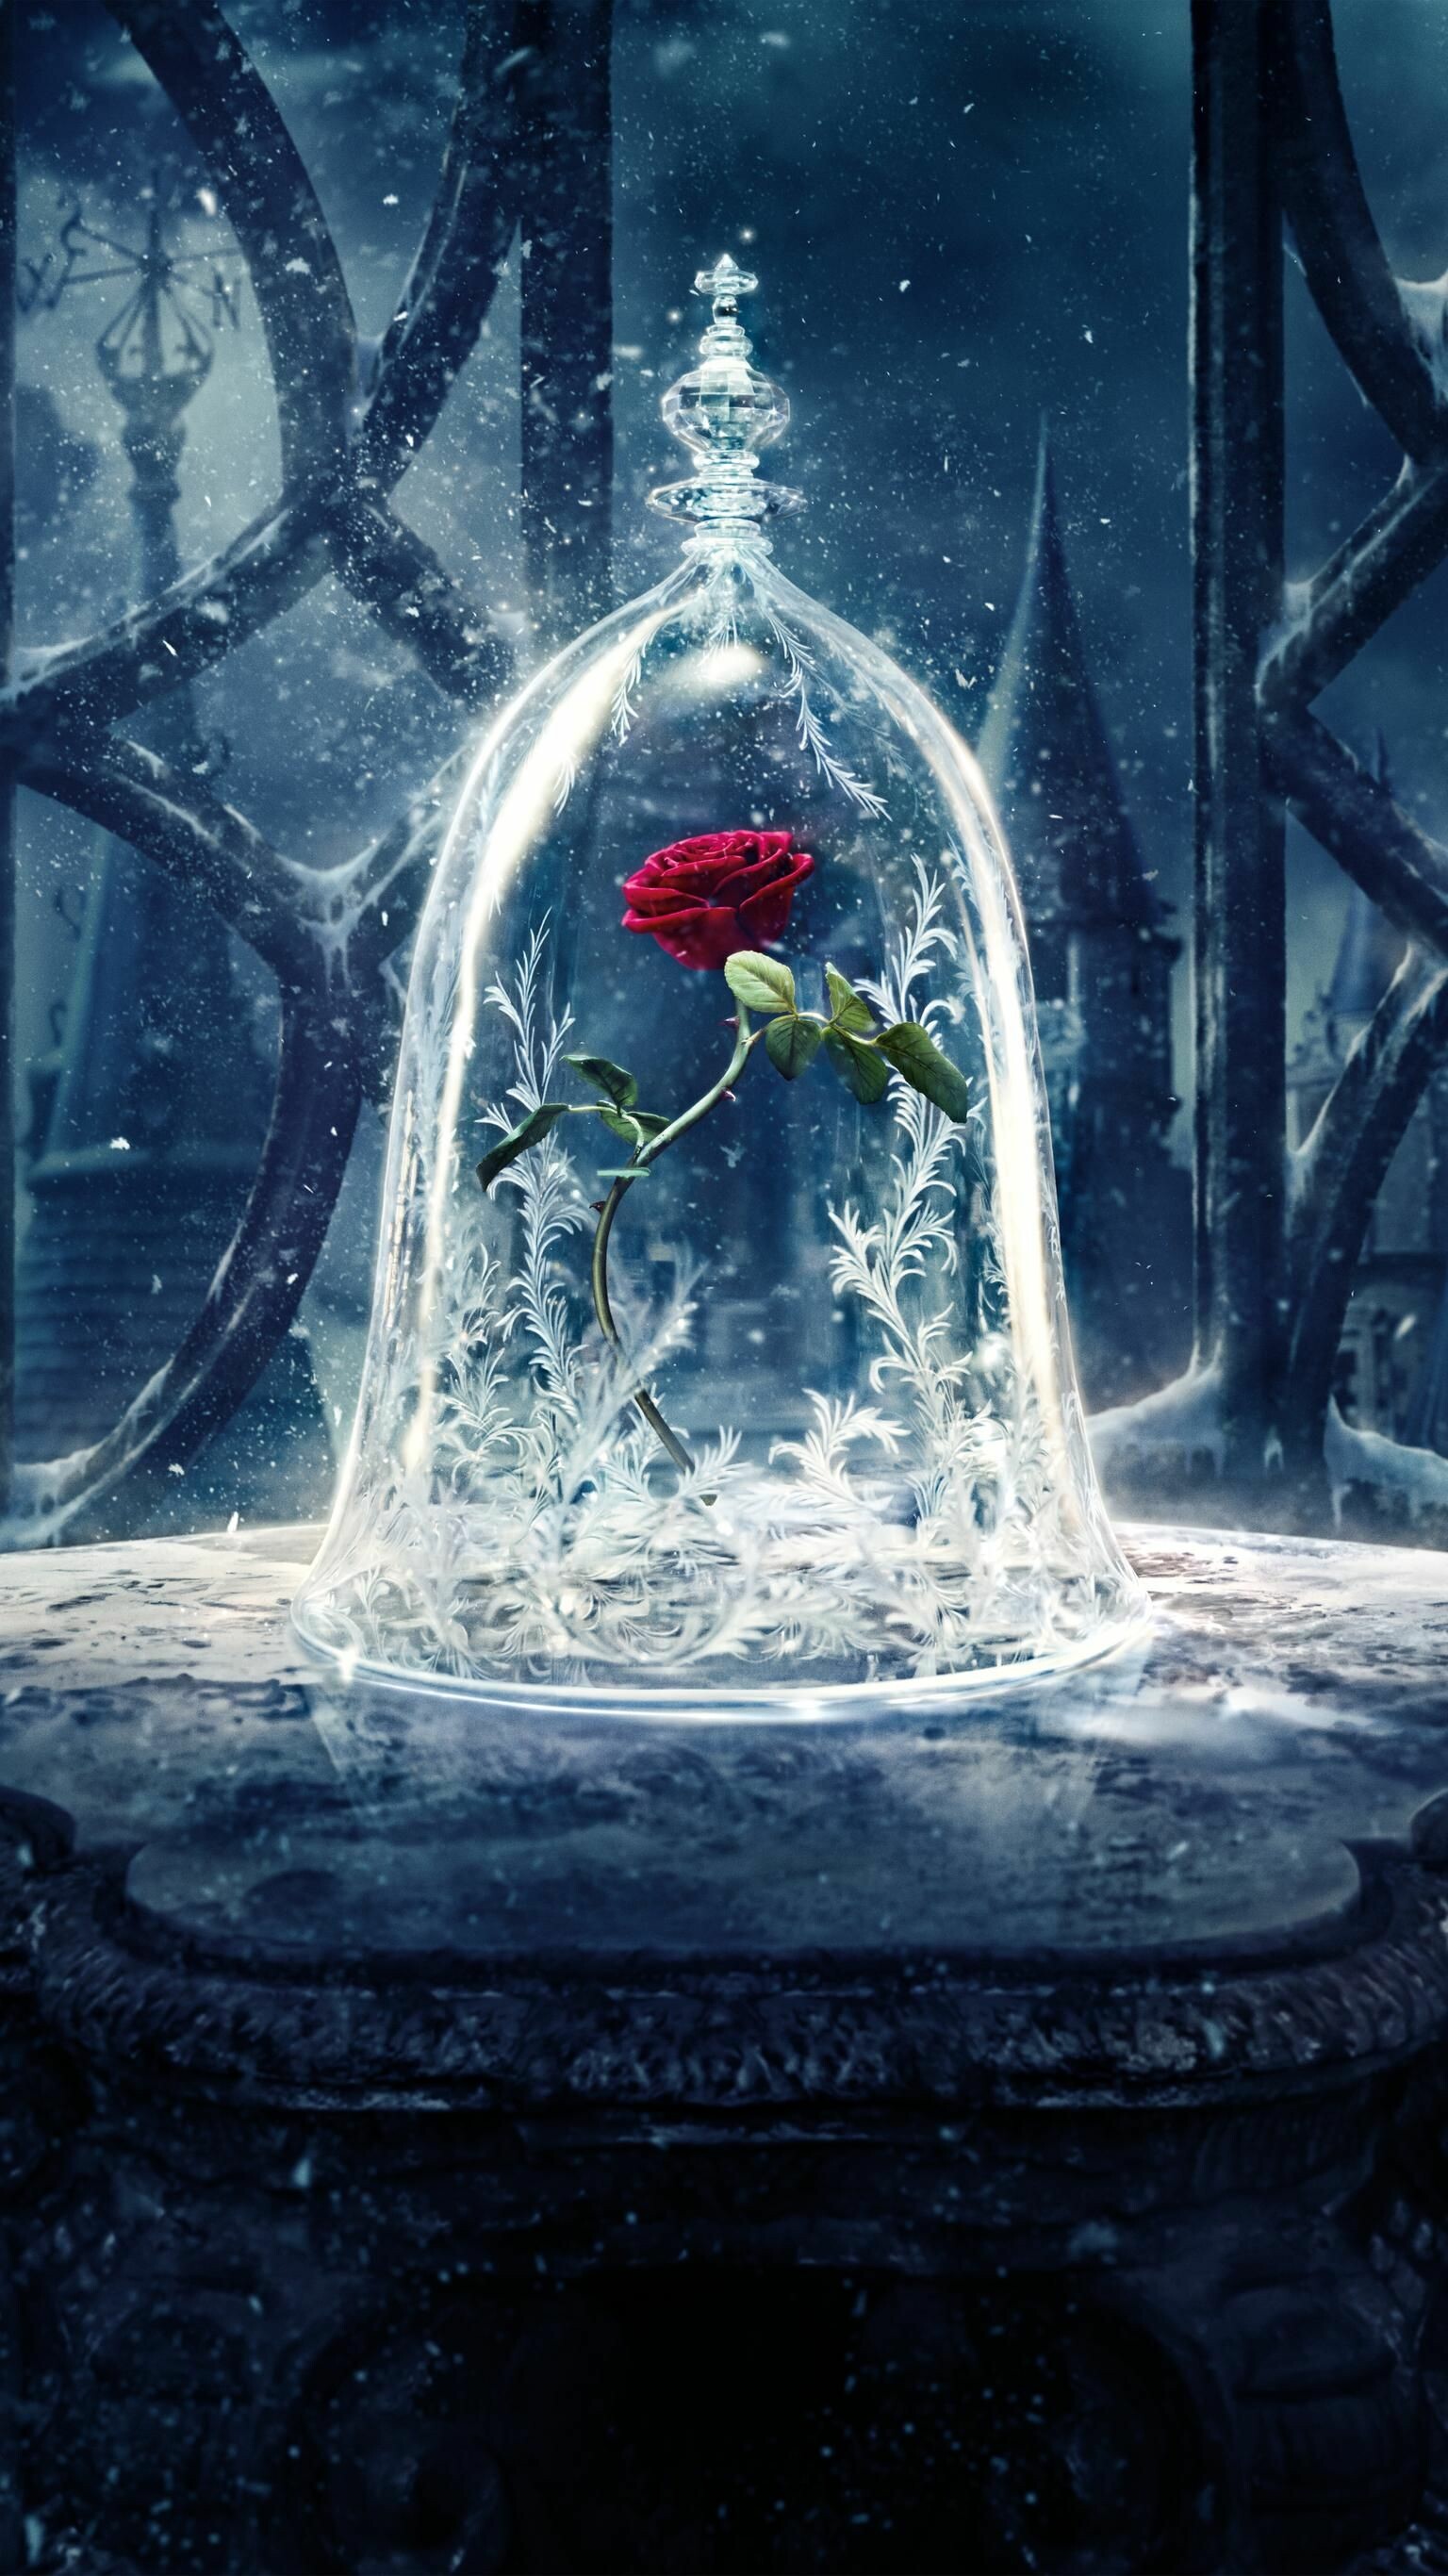 Beauty and the Beast: The Enchanted Rose, A mystical flower, The symbol of the film. 1540x2740 HD Wallpaper.